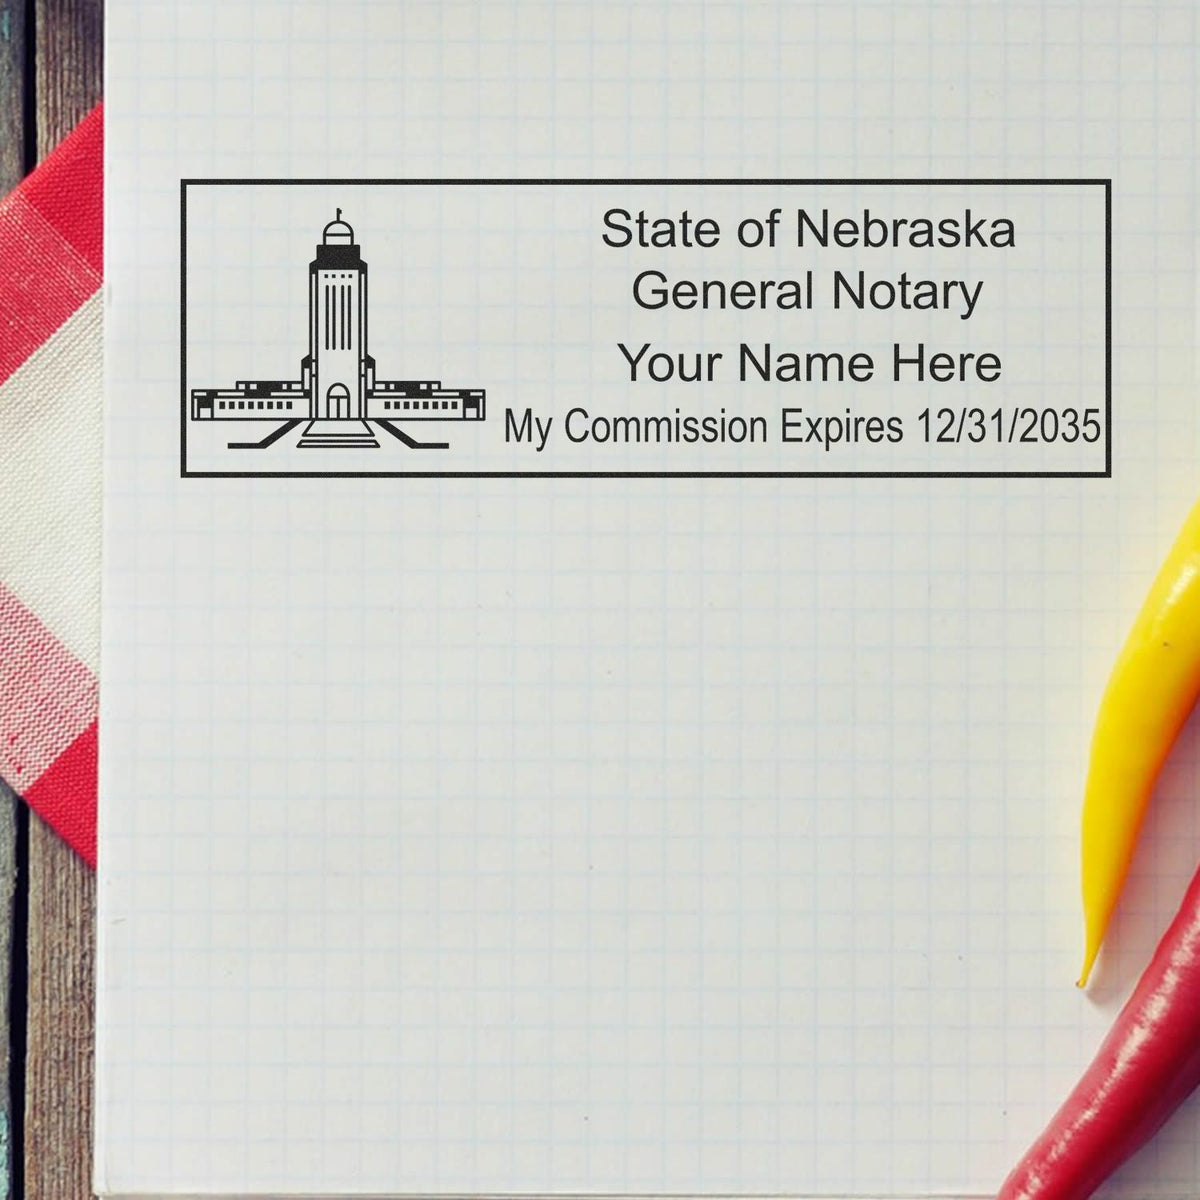 The Slim Pre-Inked State Seal Notary Stamp for Nebraska stamp impression comes to life with a crisp, detailed photo on paper - showcasing true professional quality.